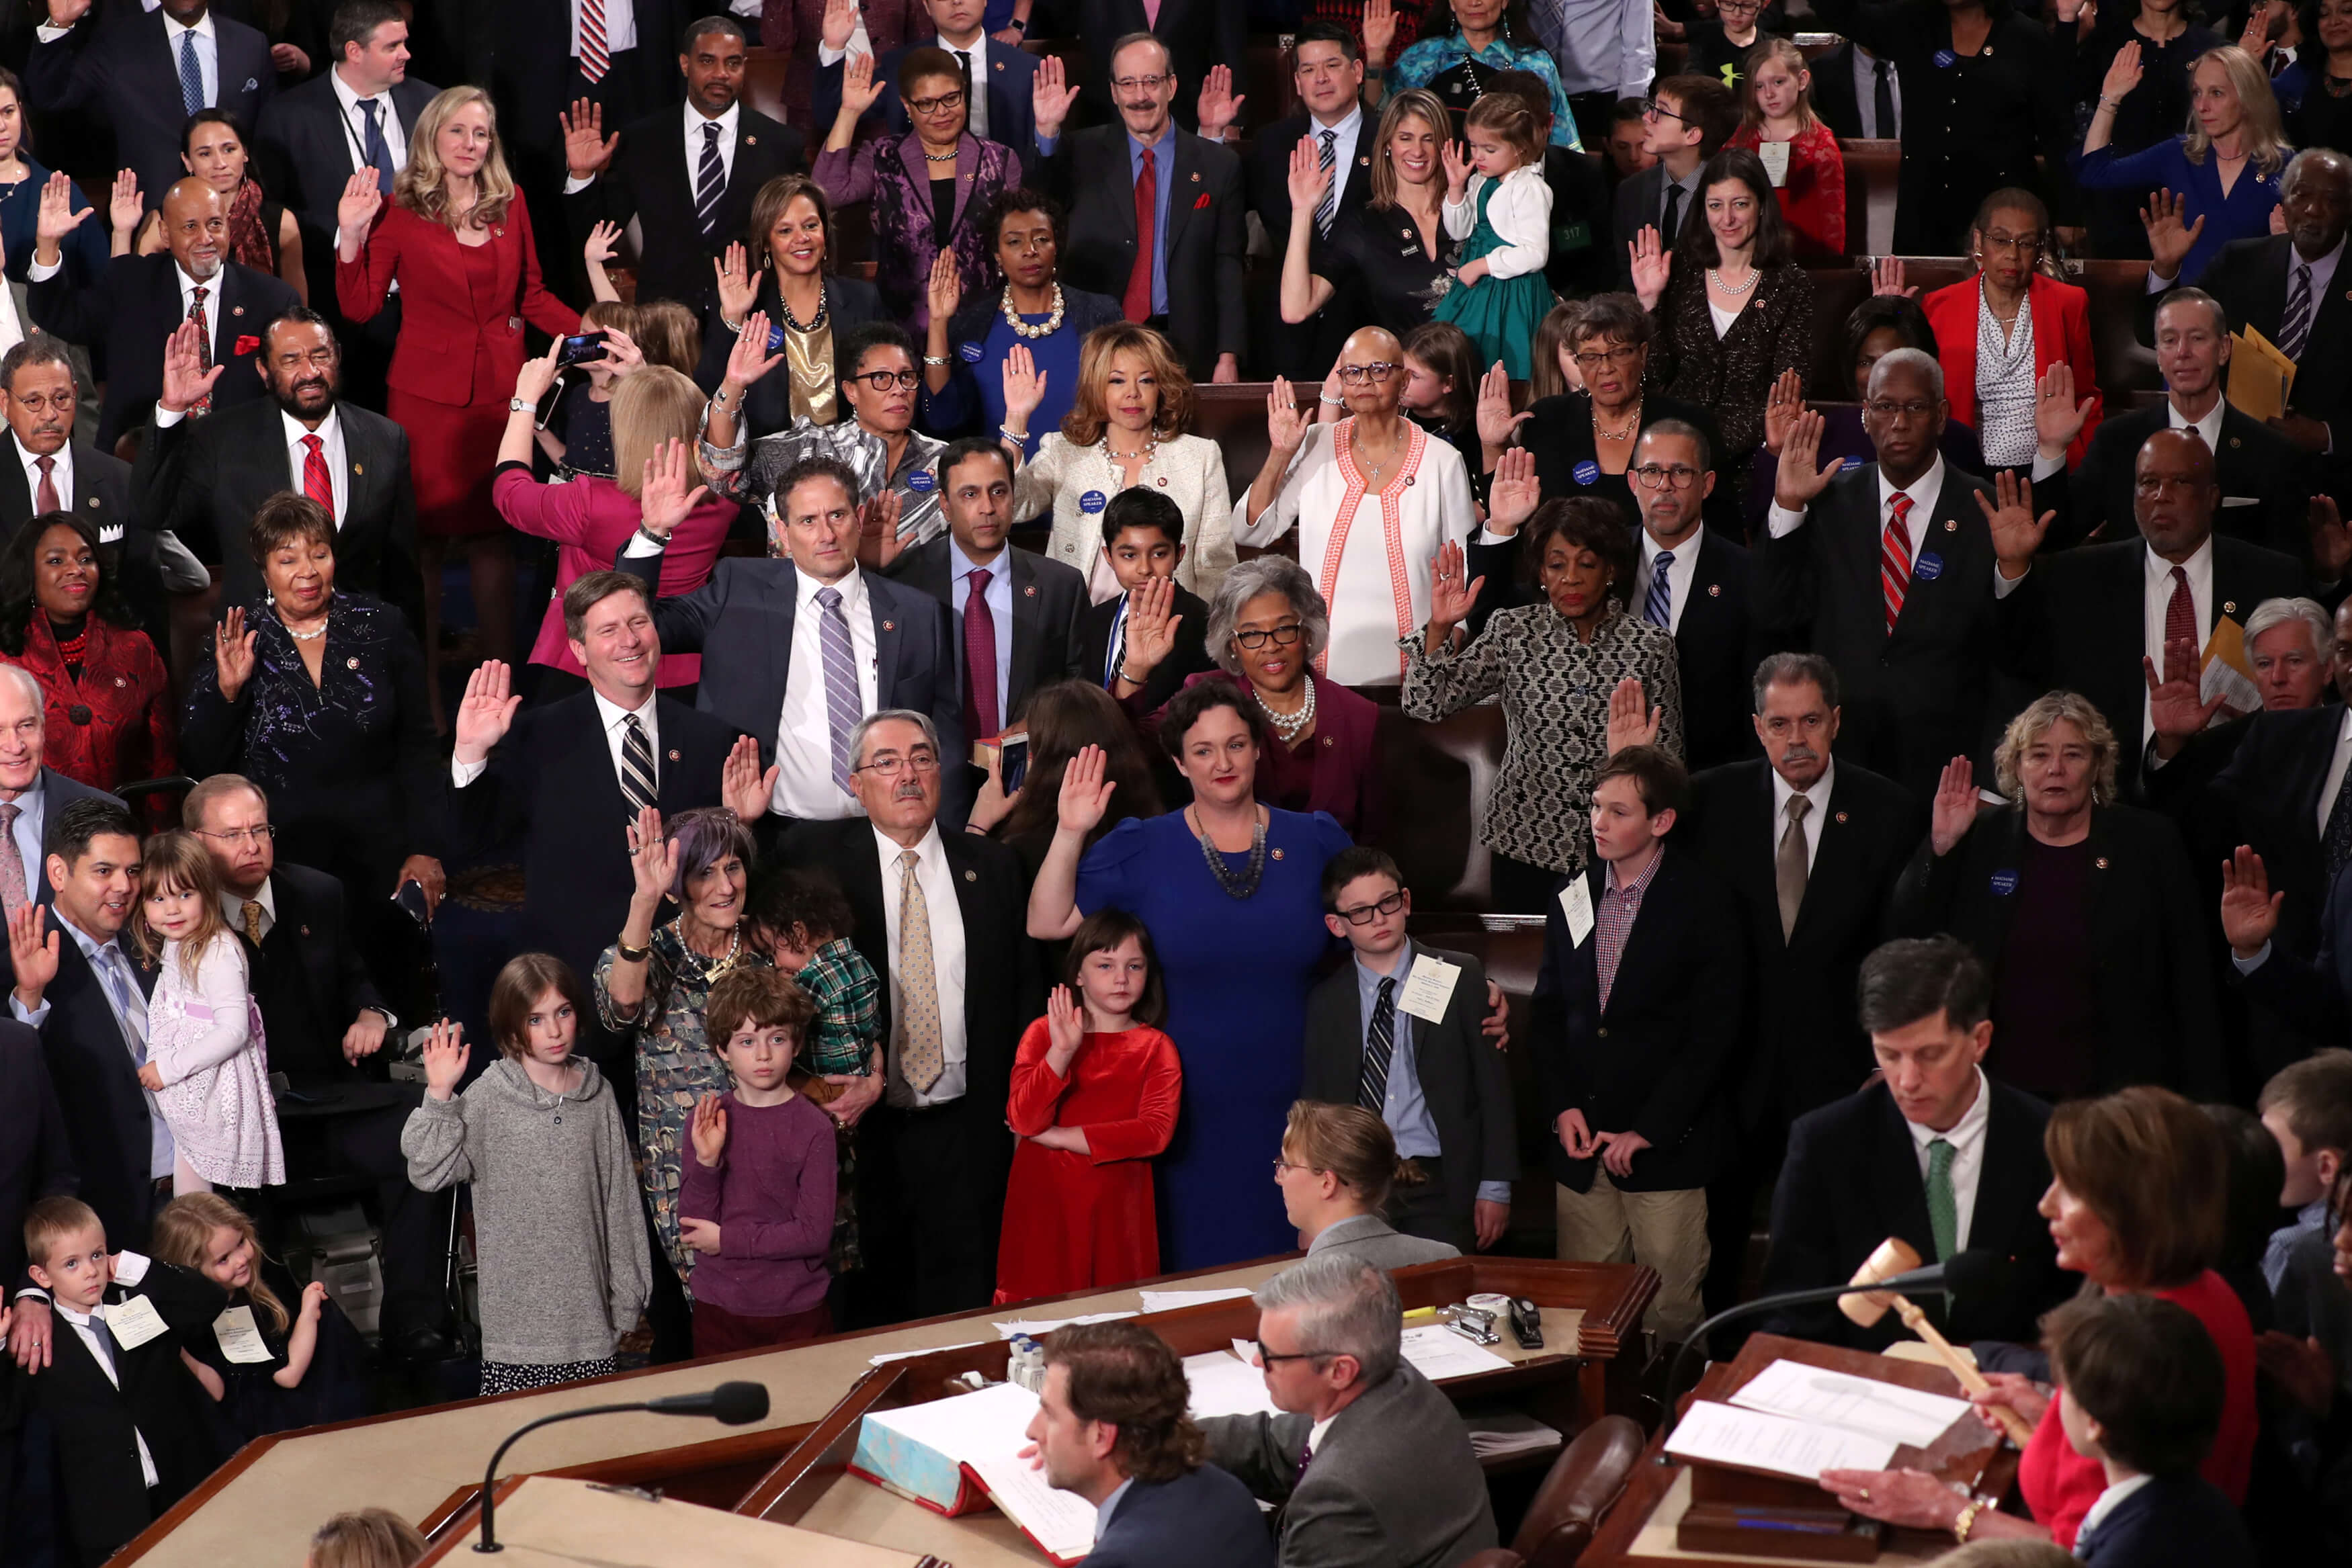 Pelosi Regains Gavel as Speaker of Most Diverse U.S. House Ever | Sojourners3500 x 2334